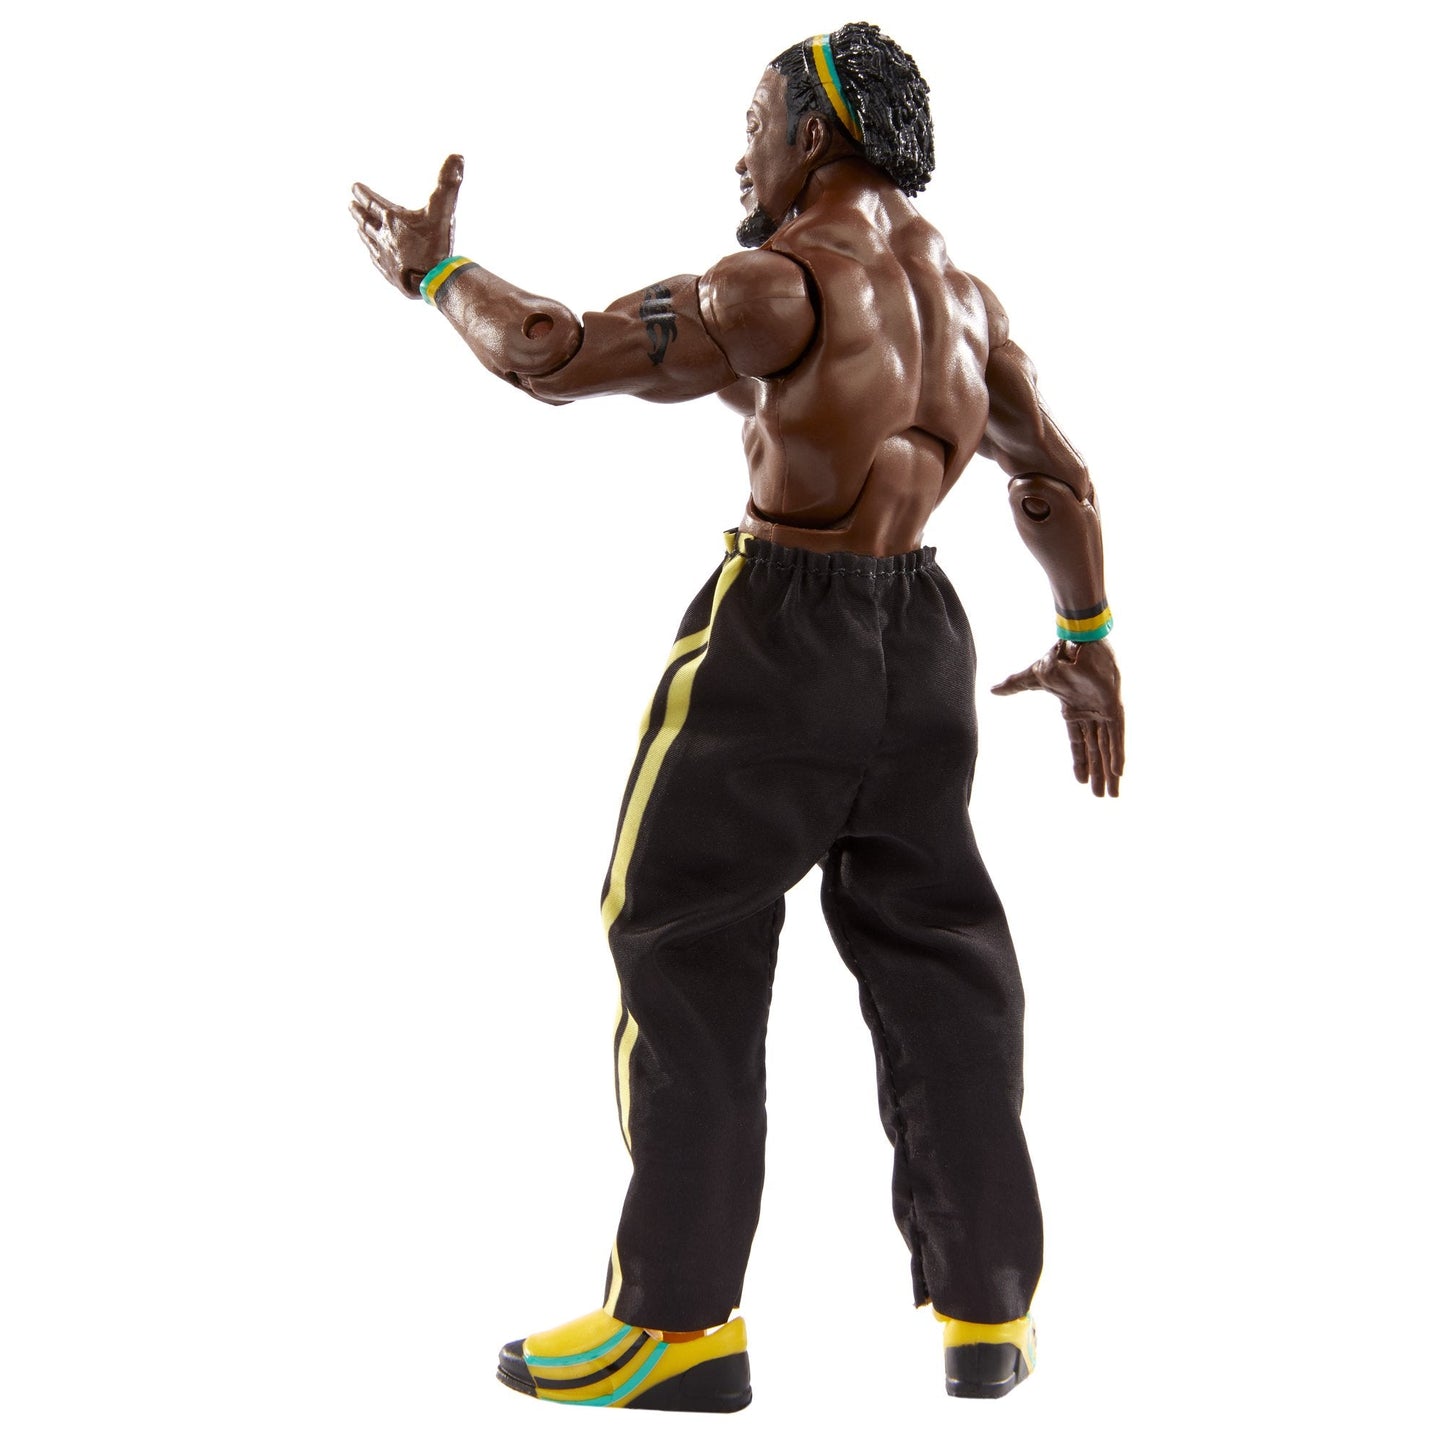 2020 WWE Mattel Elite Collection Decade of Domination Series 2 Kofi Kingston [With Pants Off, Exclusive]